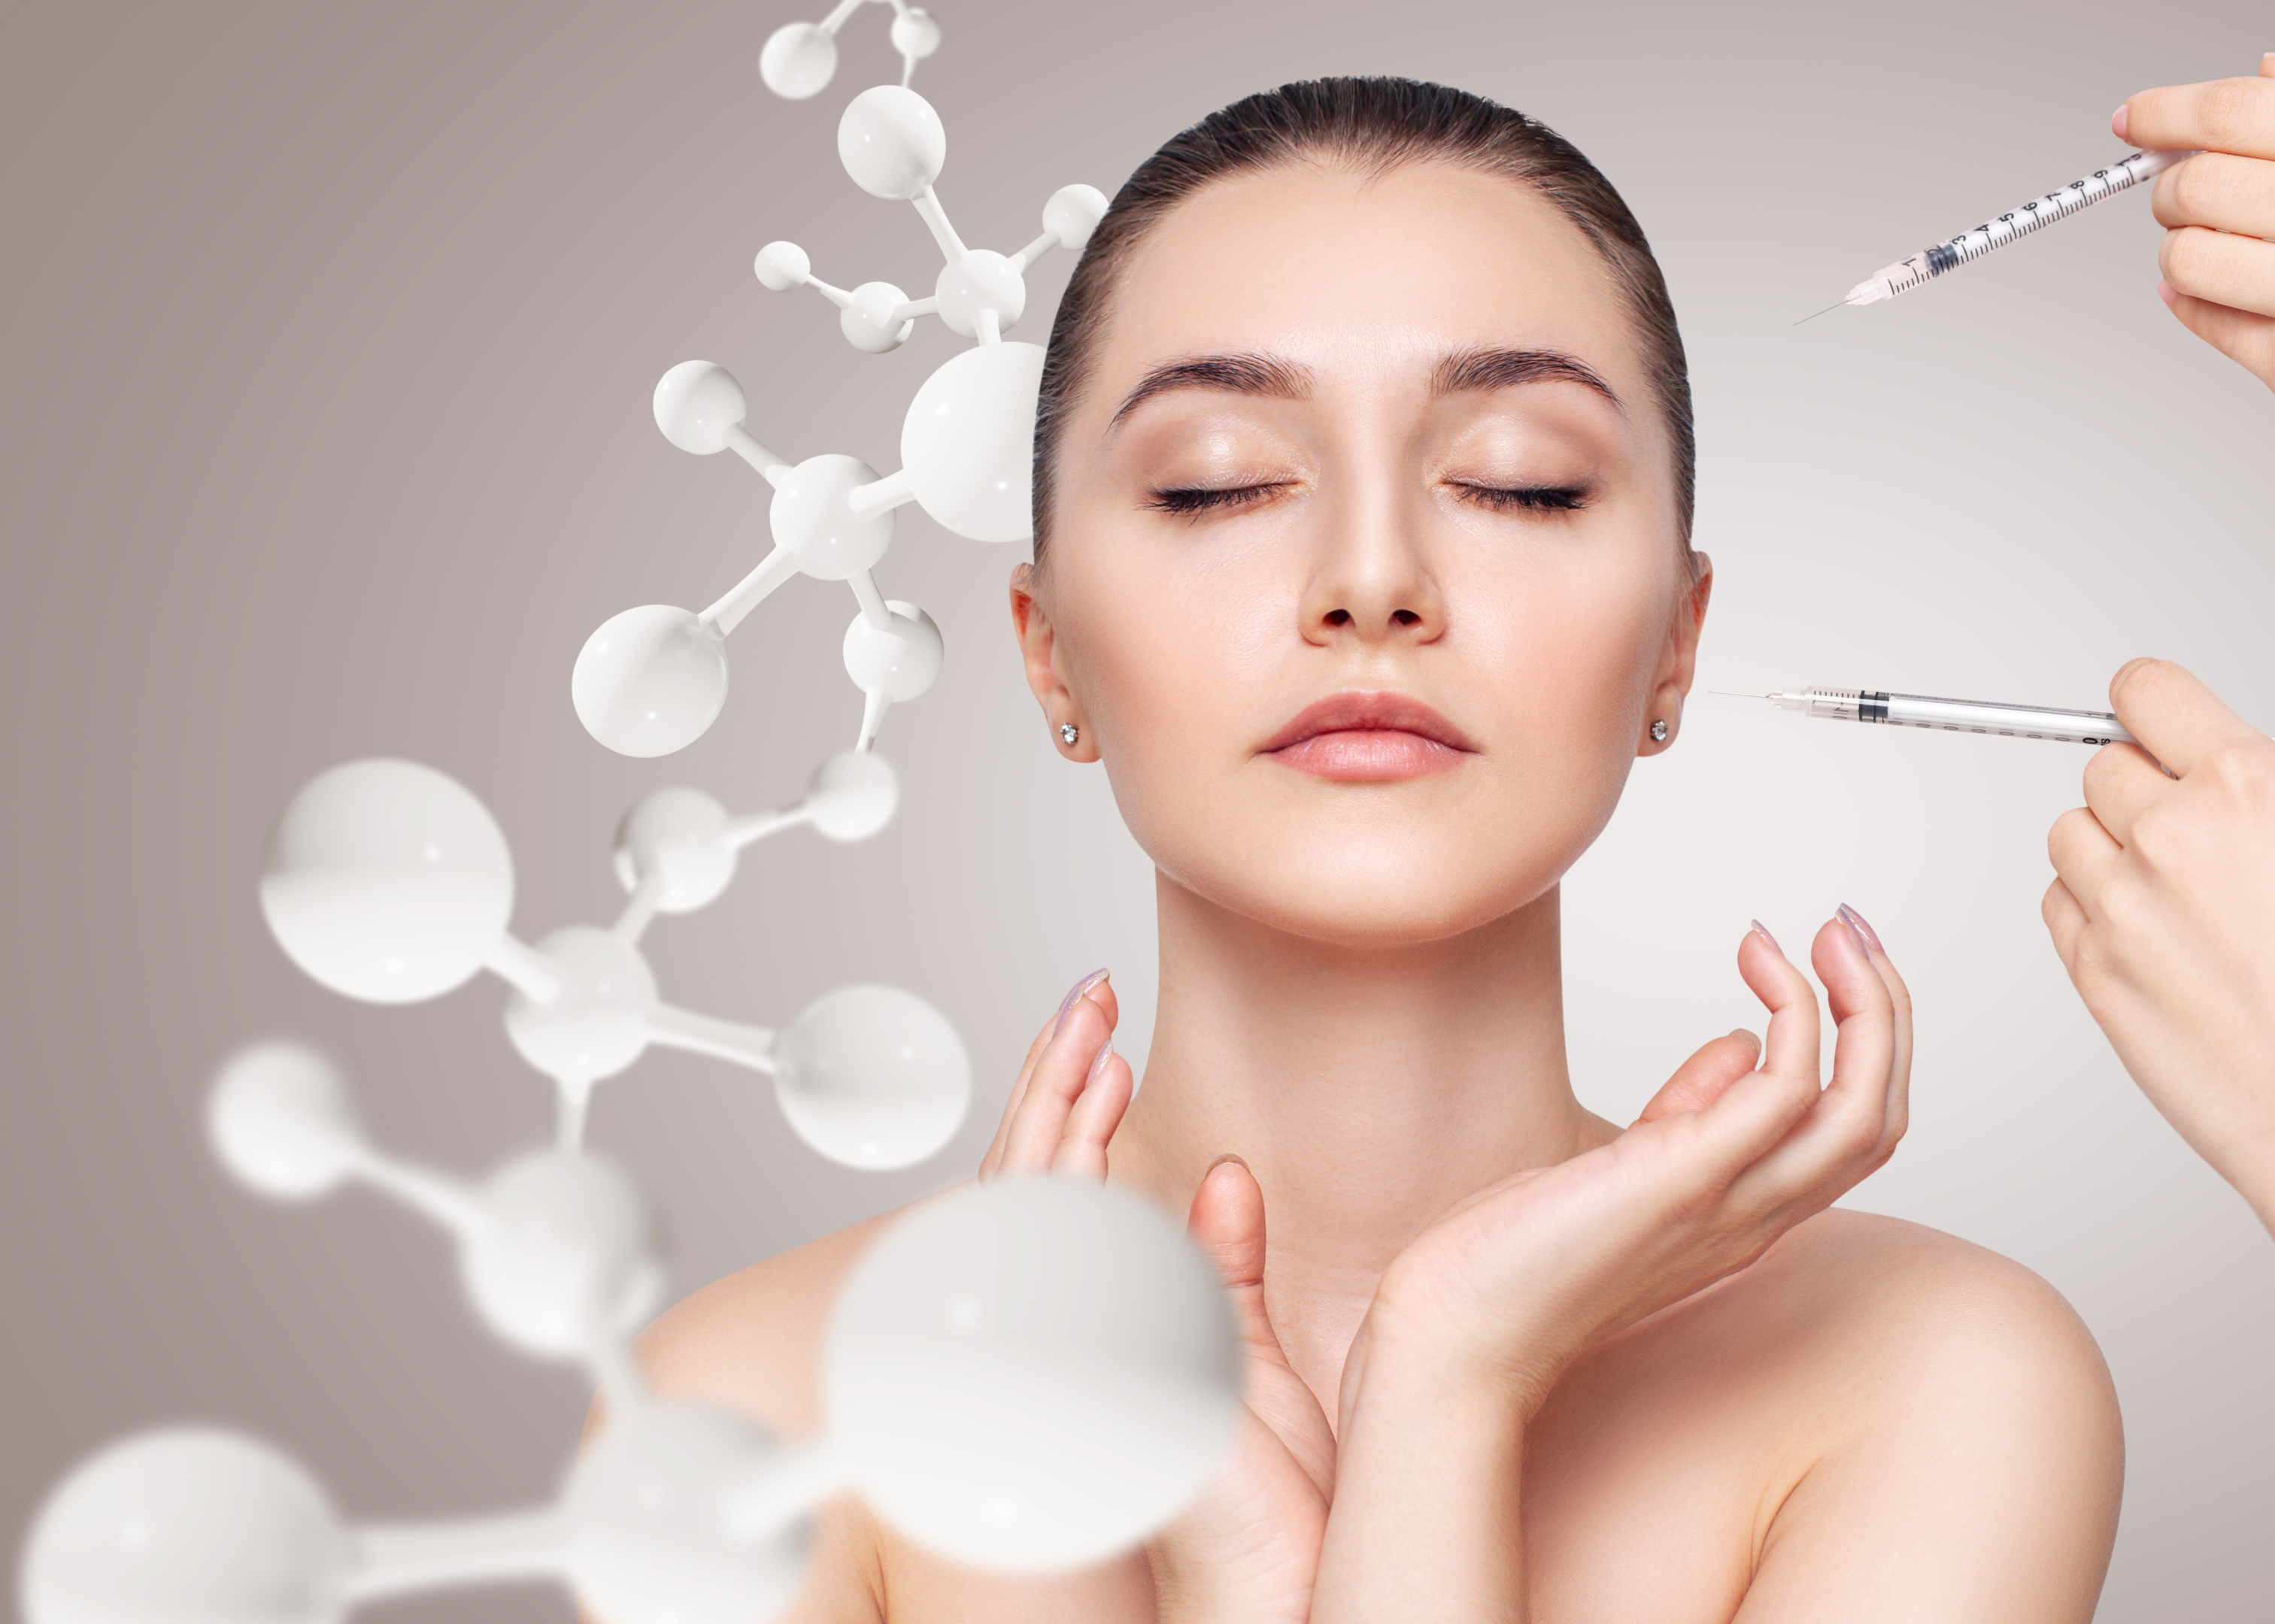 A person applying topical hyaluronic acid to their skin